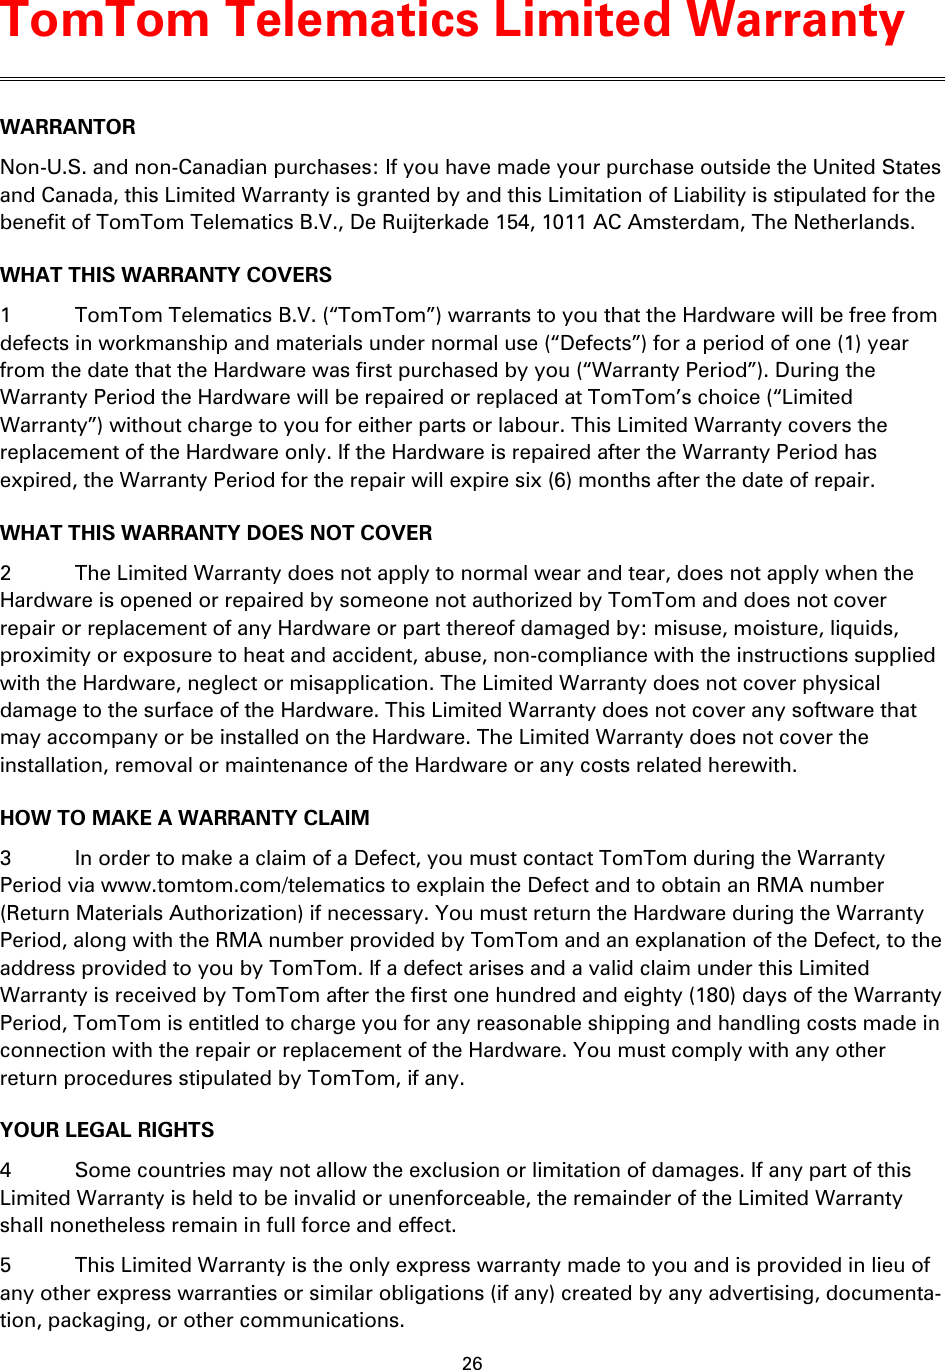 26    WARRANTOR Non-U.S. and non-Canadian purchases: If you have made your purchase outside the United States and Canada, this Limited Warranty is granted by and this Limitation of Liability is stipulated for the benefit of TomTom Telematics B.V., De Ruijterkade 154, 1011 AC Amsterdam, The Netherlands.   WHAT THIS WARRANTY COVERS 1  TomTom Telematics B.V. (“TomTom”) warrants to you that the Hardware will be free from defects in workmanship and materials under normal use (“Defects”) for a period of one (1) year from the date that the Hardware was first purchased by you (“Warranty Period”). During the Warranty Period the Hardware will be repaired or replaced at TomTom’s choice (“Limited Warranty”) without charge to you for either parts or labour. This Limited Warranty covers the replacement of the Hardware only. If the Hardware is repaired after the Warranty Period has expired, the Warranty Period for the repair will expire six (6) months after the date of repair. WHAT THIS WARRANTY DOES NOT COVER 2  The Limited Warranty does not apply to normal wear and tear, does not apply when the Hardware is opened or repaired by someone not authorized by TomTom and does not cover repair or replacement of any Hardware or part thereof damaged by: misuse, moisture, liquids, proximity or exposure to heat and accident, abuse, non-compliance with the instructions supplied with the Hardware, neglect or misapplication. The Limited Warranty does not cover physical damage to the surface of the Hardware. This Limited Warranty does not cover any software that may accompany or be installed on the Hardware. The Limited Warranty does not cover the installation, removal or maintenance of the Hardware or any costs related herewith. HOW TO MAKE A WARRANTY CLAIM 3  In order to make a claim of a Defect, you must contact TomTom during the Warranty Period via www.tomtom.com/telematics to explain the Defect and to obtain an RMA number (Return Materials Authorization) if necessary. You must return the Hardware during the Warranty Period, along with the RMA number provided by TomTom and an explanation of the Defect, to the address provided to you by TomTom. If a defect arises and a valid claim under this Limited Warranty is received by TomTom after the first one hundred and eighty (180) days of the Warranty Period, TomTom is entitled to charge you for any reasonable shipping and handling costs made in connection with the repair or replacement of the Hardware. You must comply with any other return procedures stipulated by TomTom, if any. YOUR LEGAL RIGHTS 4  Some countries may not allow the exclusion or limitation of damages. If any part of this Limited Warranty is held to be invalid or unenforceable, the remainder of the Limited Warranty shall nonetheless remain in full force and effect. 5  This Limited Warranty is the only express warranty made to you and is provided in lieu of any other express warranties or similar obligations (if any) created by any advertising, documenta-tion, packaging, or other communications. TomTom Telematics Limited Warranty 